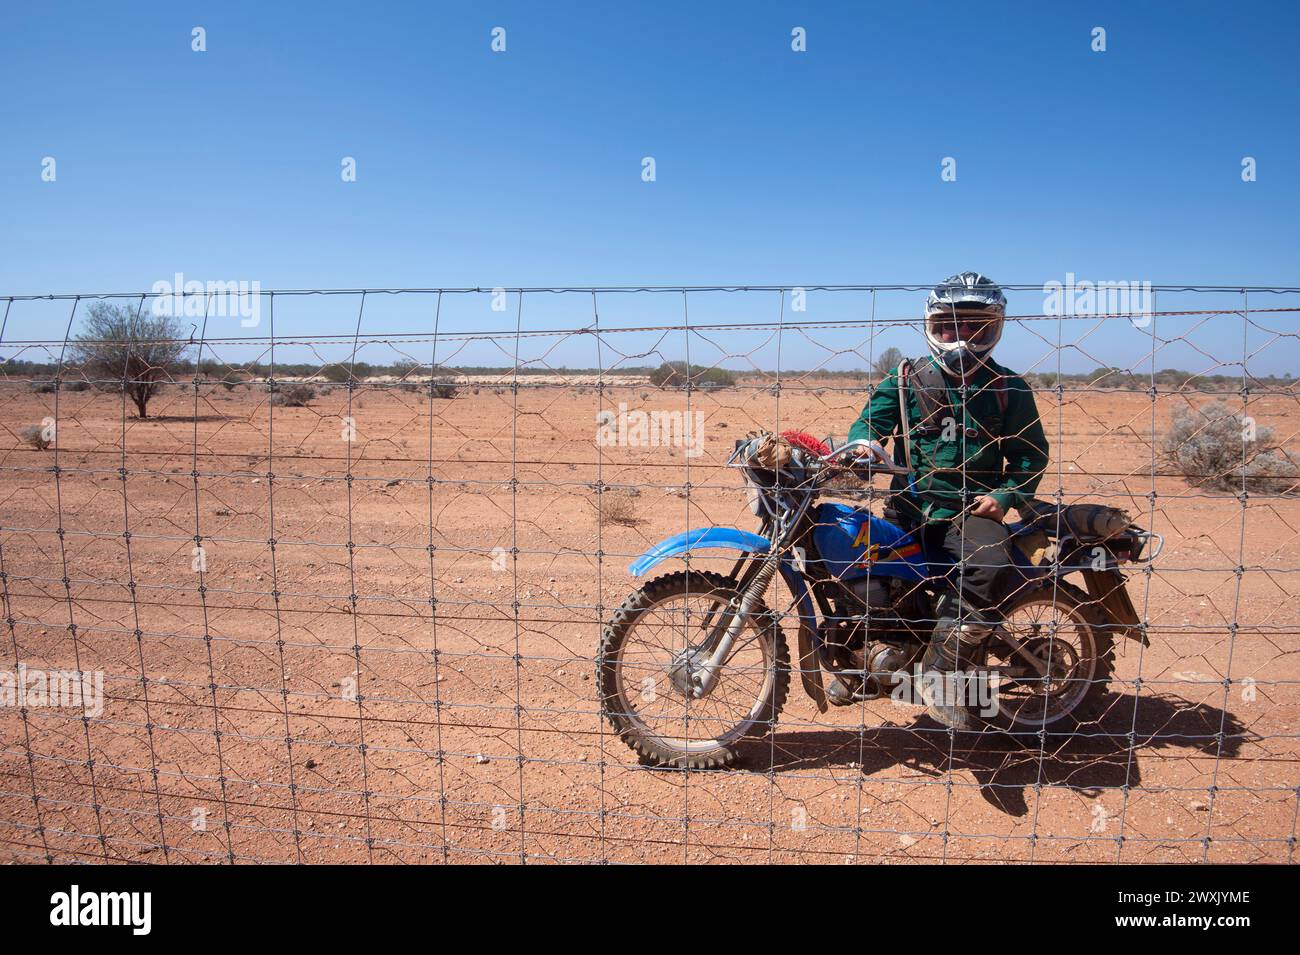 Drover mustering merino sheep from his bike at Rawlinna Station, Australia’s largest operating sheep station, Nullarbor Plain, Western Australia, WA, Stock Photo